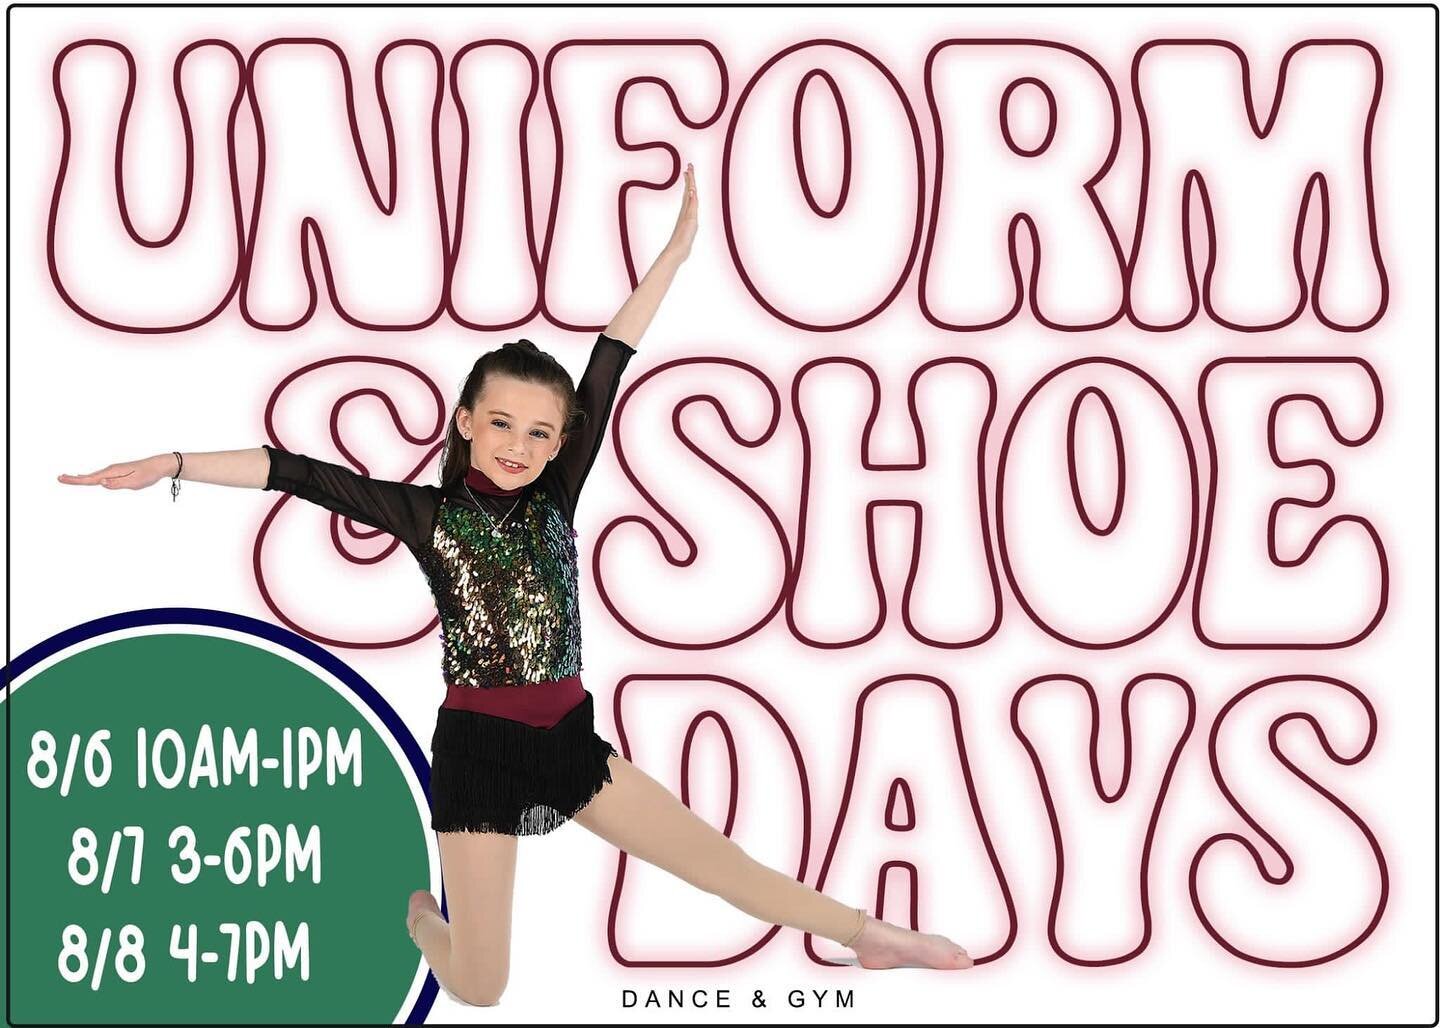 Today 8/8/22 is the final day for uniform &amp; shoes.
4-7pm
337-459-2669
www.danceandgymvp.com